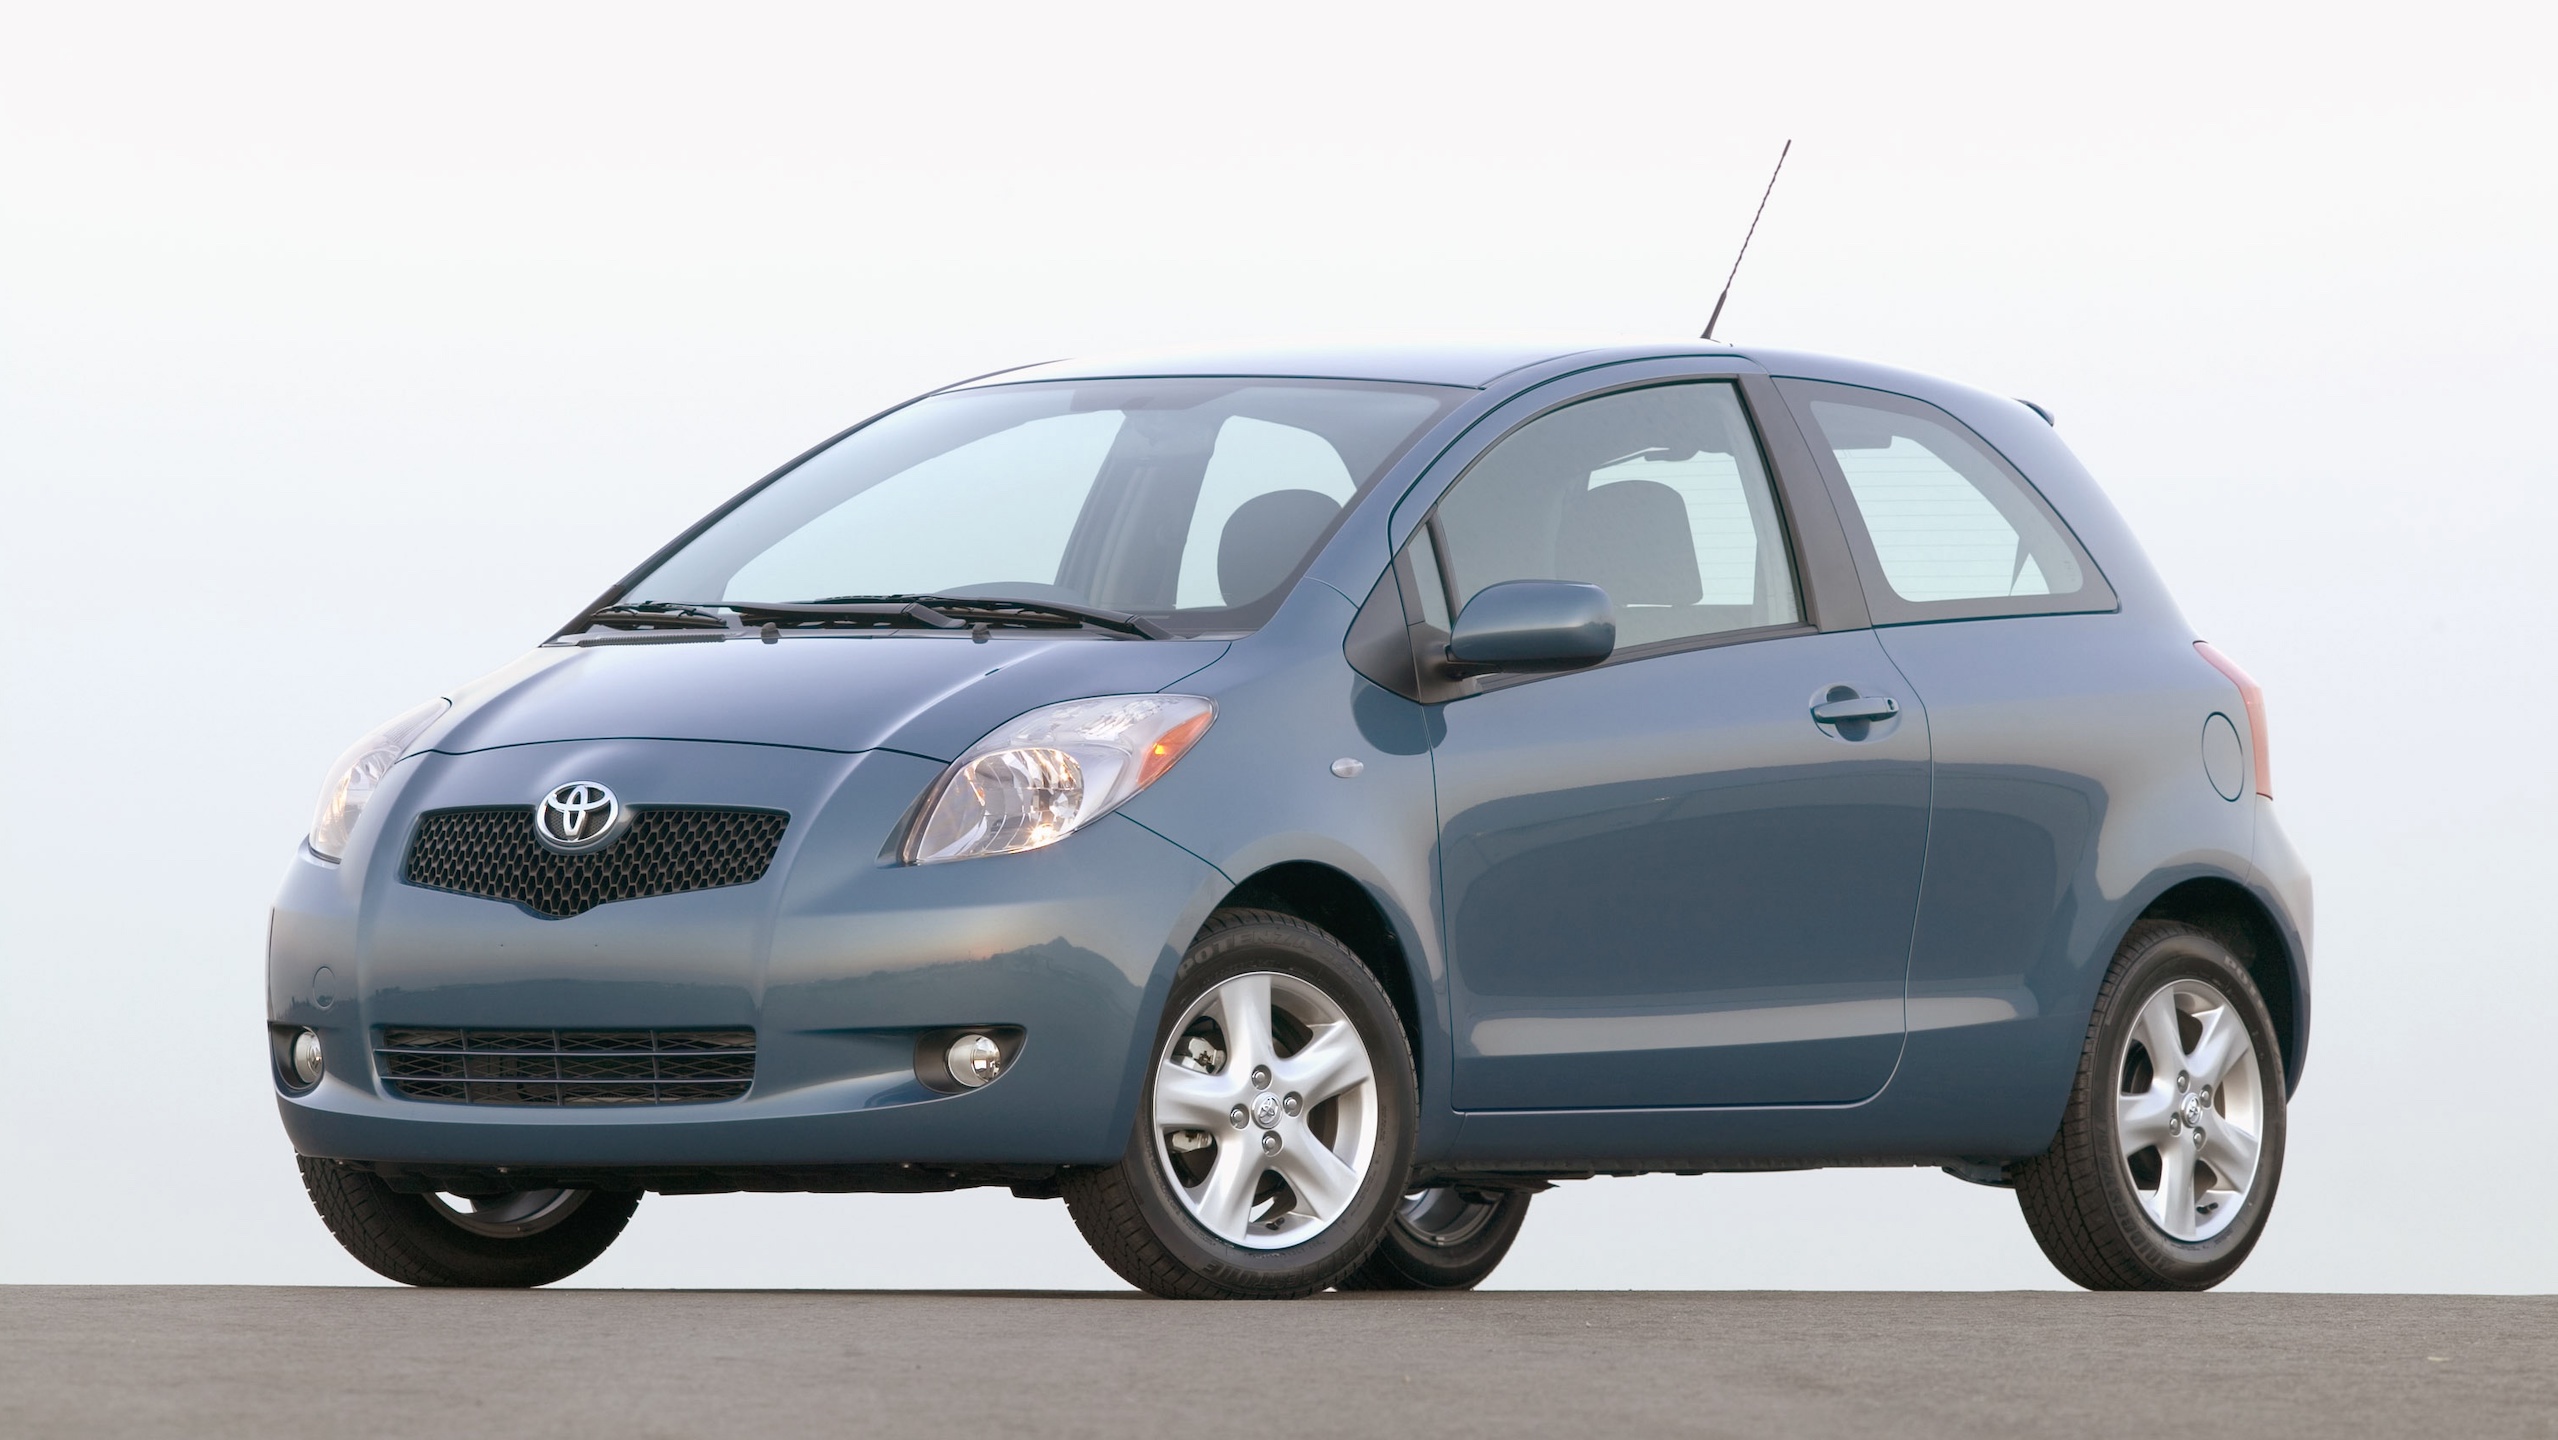 Aangepaste Monopoly Zonnebrand 2007 Toyota Yaris Review: An Awful Road Trip Car Because of One Small Detail